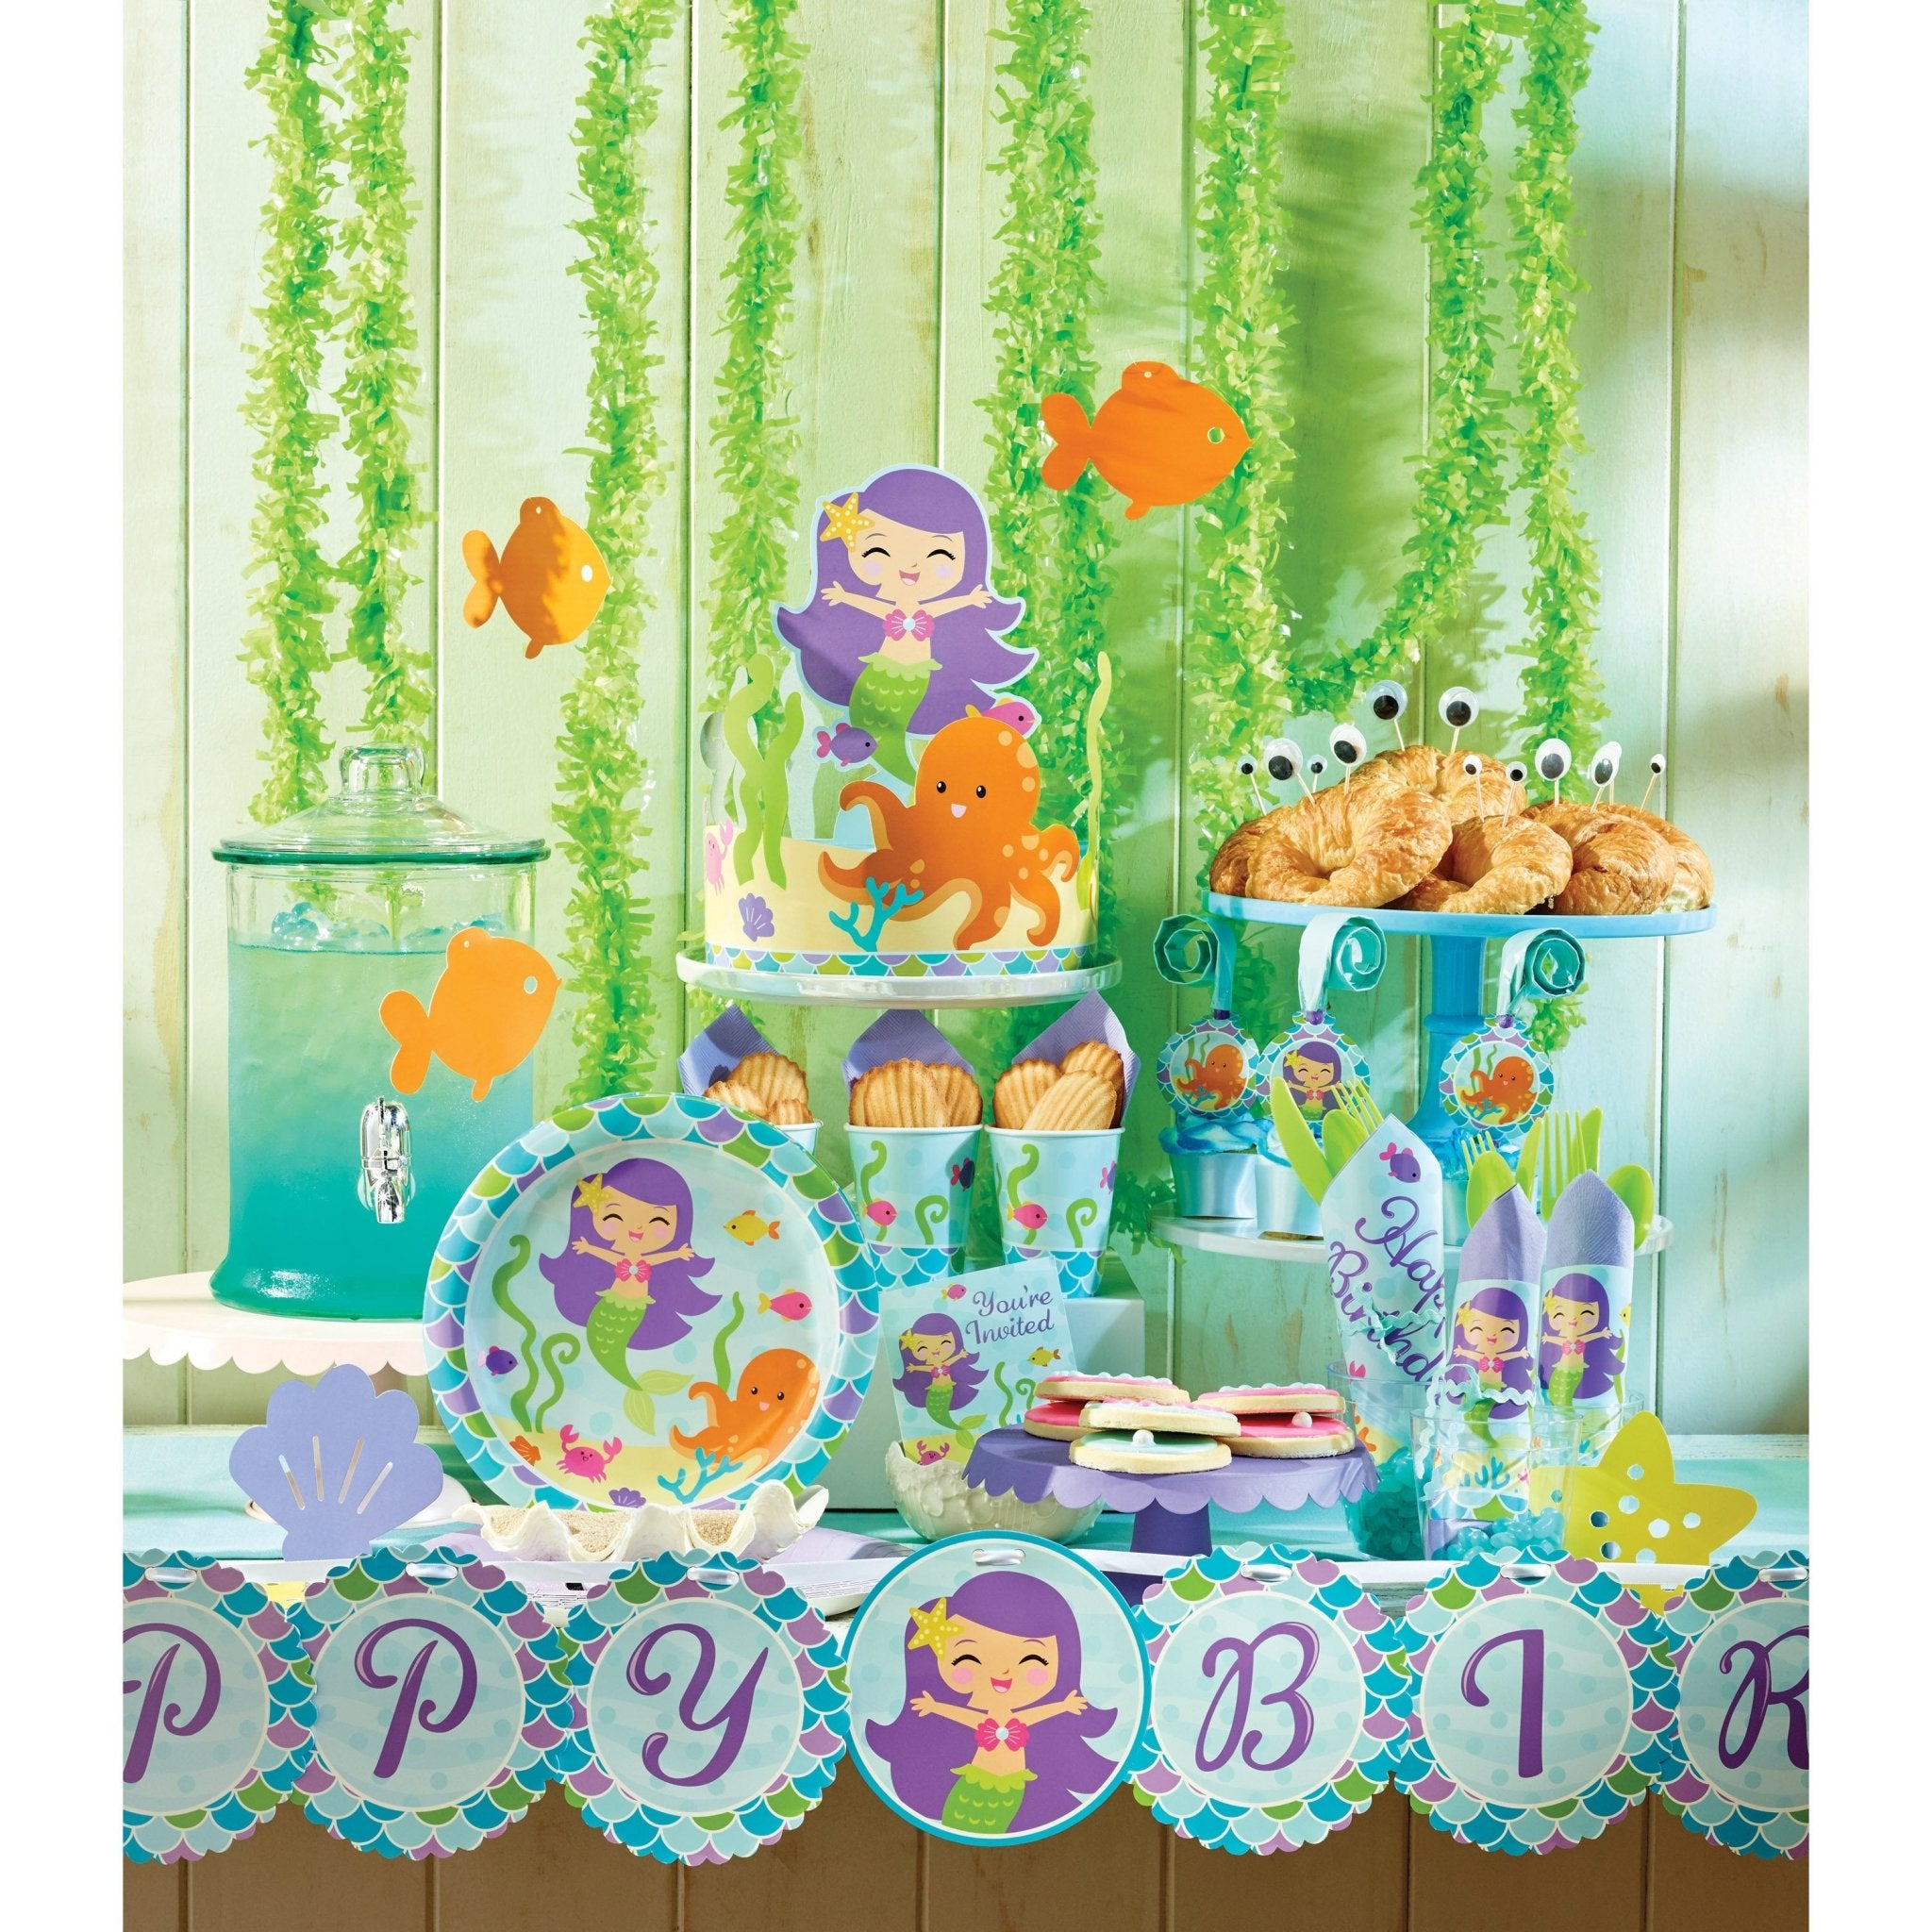 Ocean Party Hanging Decorations - Stesha Party - birthday, birthday